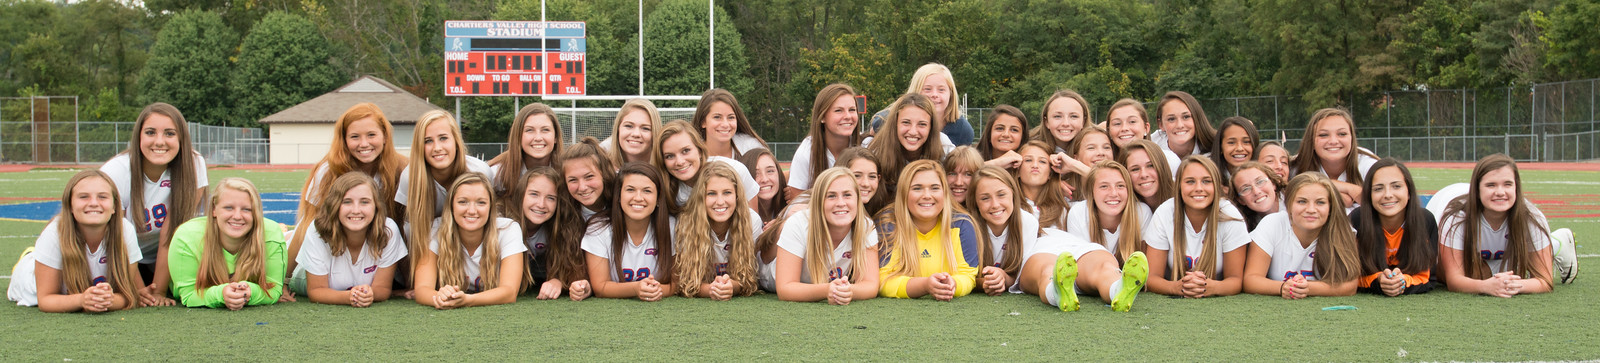 The Chartiers Valley Lady Colts